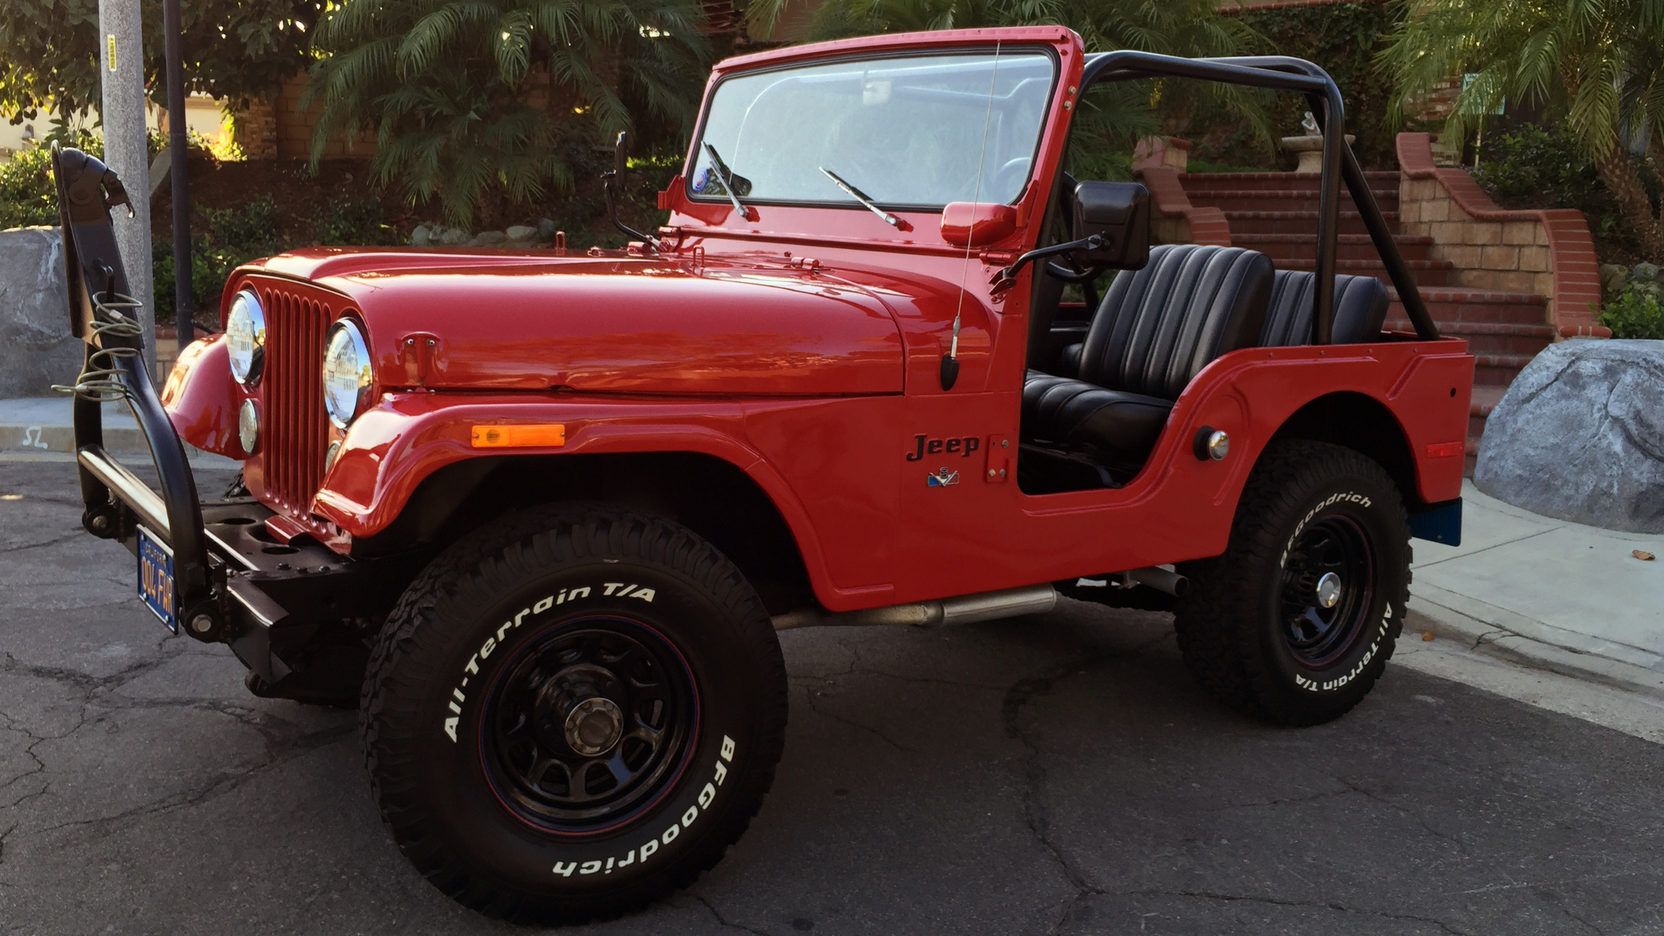 A parked Jeep CJ-5 from 1972